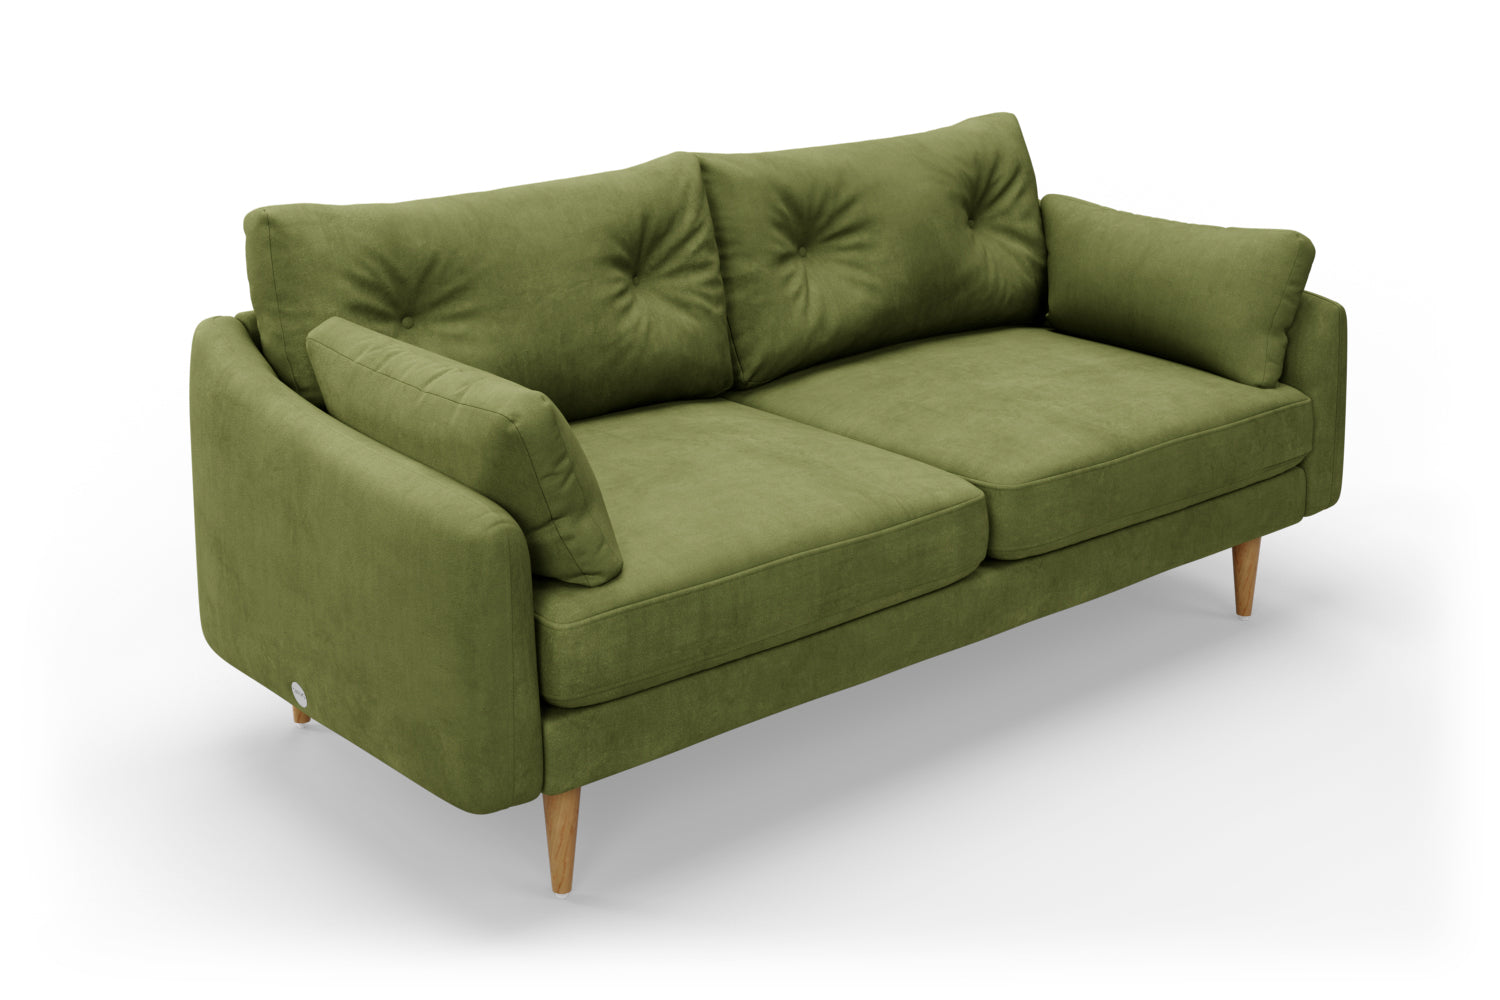 SNUG | The Rebel 3 Seater Sofa with Button Back and Bolster Cushions in Olive